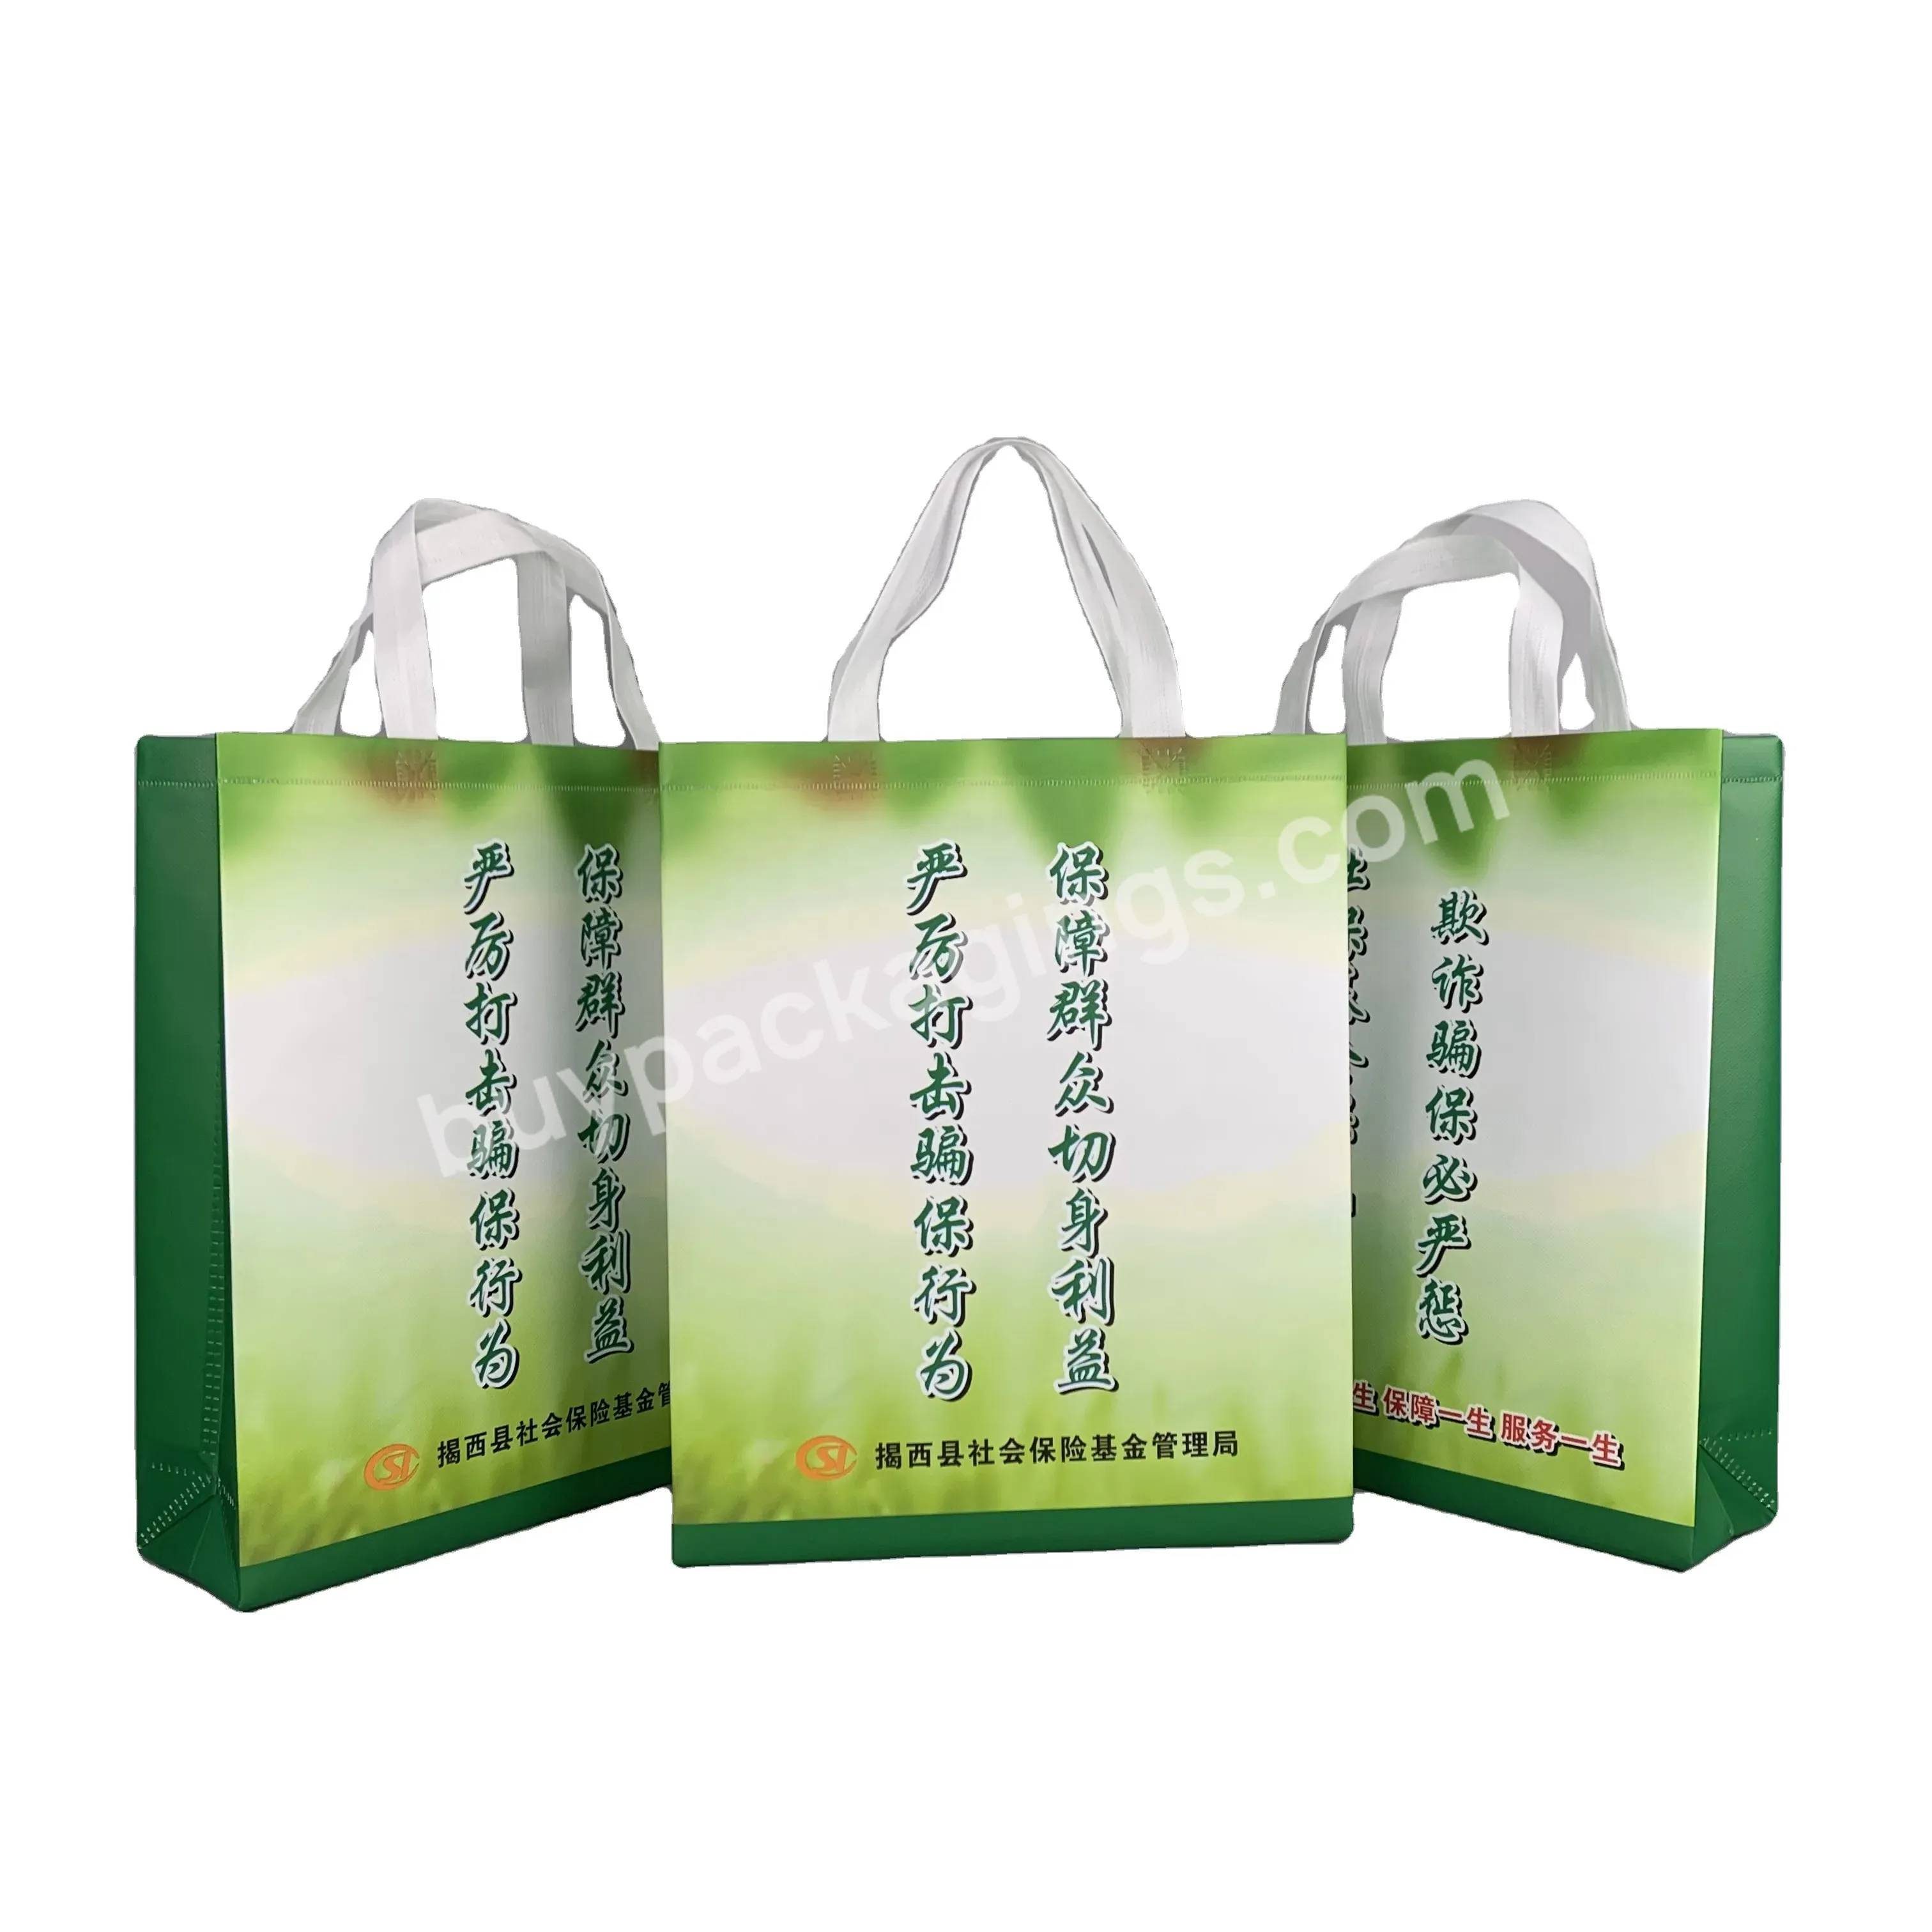 Whole Sale Tough Recyclable Ecological Biodegradable Waterproof Non Woven Bag With Handle - Buy Whole Sale Tough Recyclable Shopping Bag,Ecological Biodegradable Non Woven Bag,Waterproofnon Woven Bag With Handle.